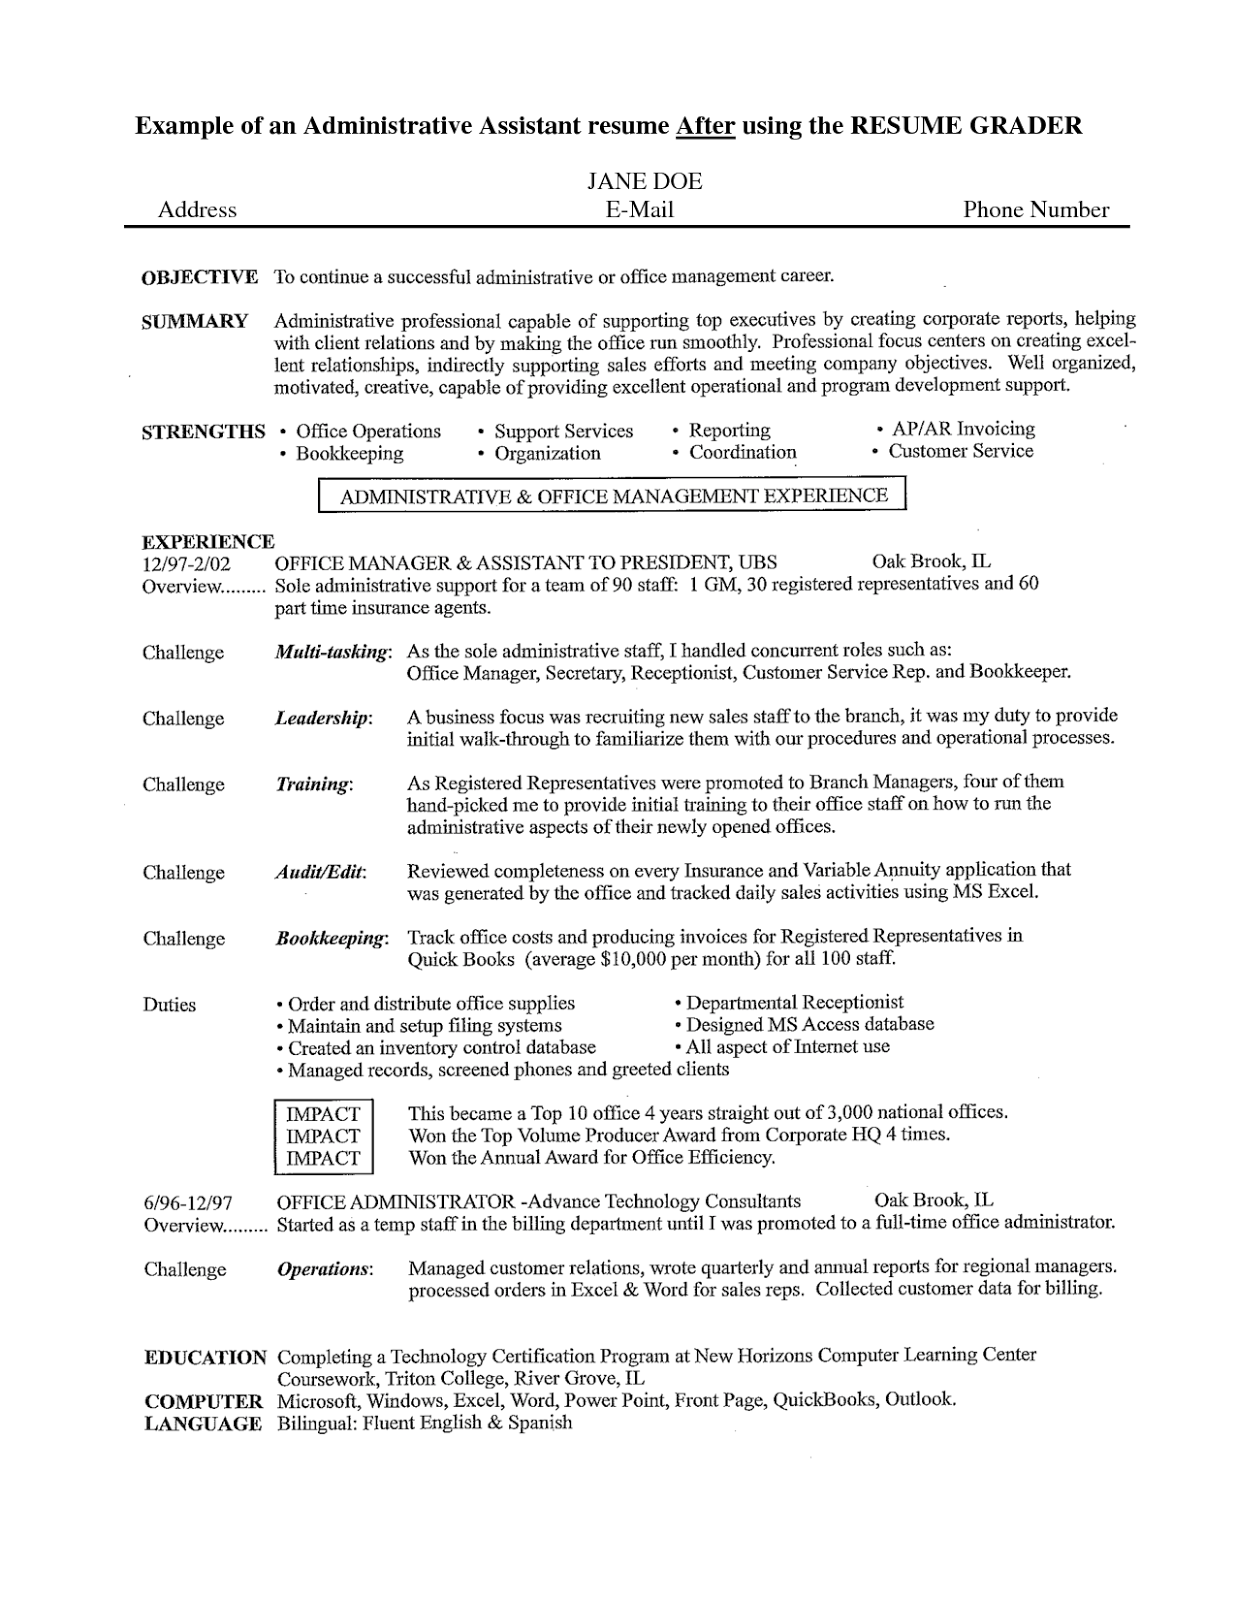 Sample excecutive assistant resume